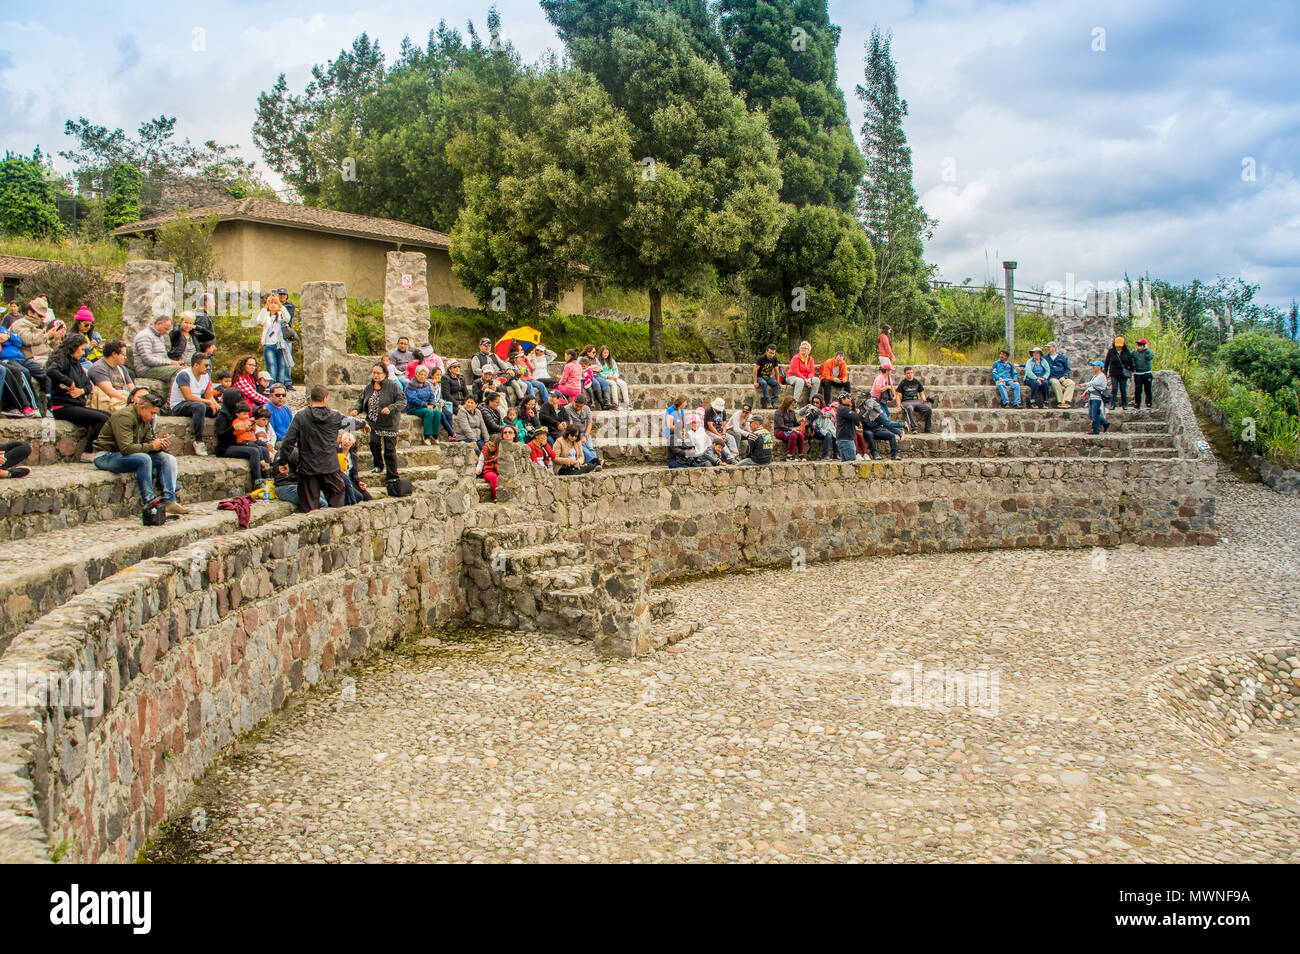 OTAVALO, ECUADOR - MAY 29, 2018: Outdoor view of unidentified people enjoying the show in the flight platform used for acrobacies of the different birds as eagles at the Condor Park in Otavalo Stock Photo